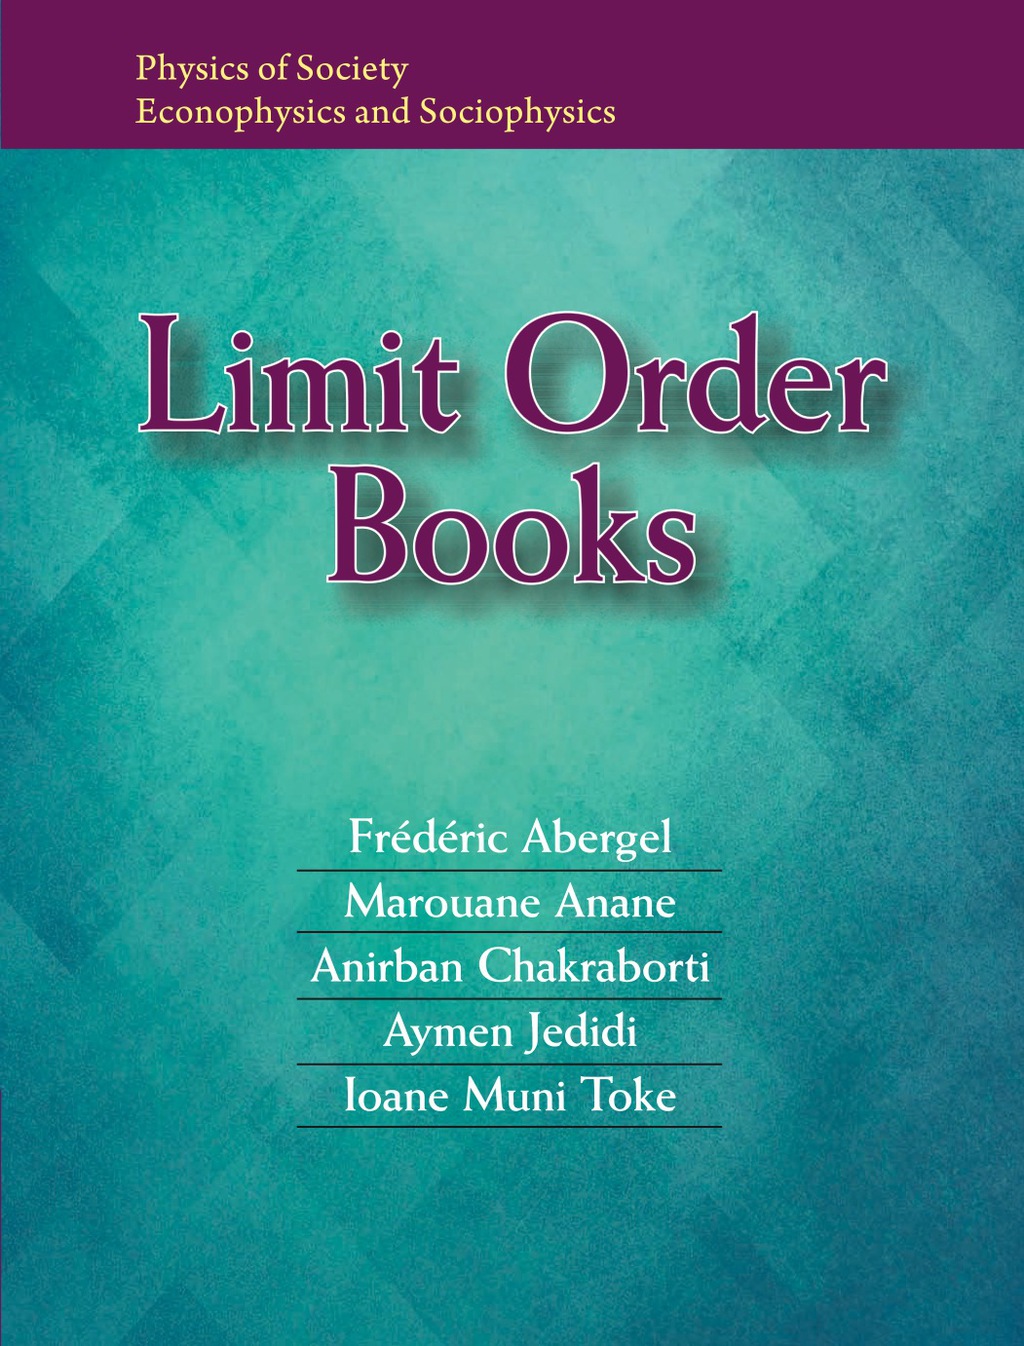 Books limited. Ordering a book. Cambridge physics books. Book limit. Sociophysics: an Introduction.